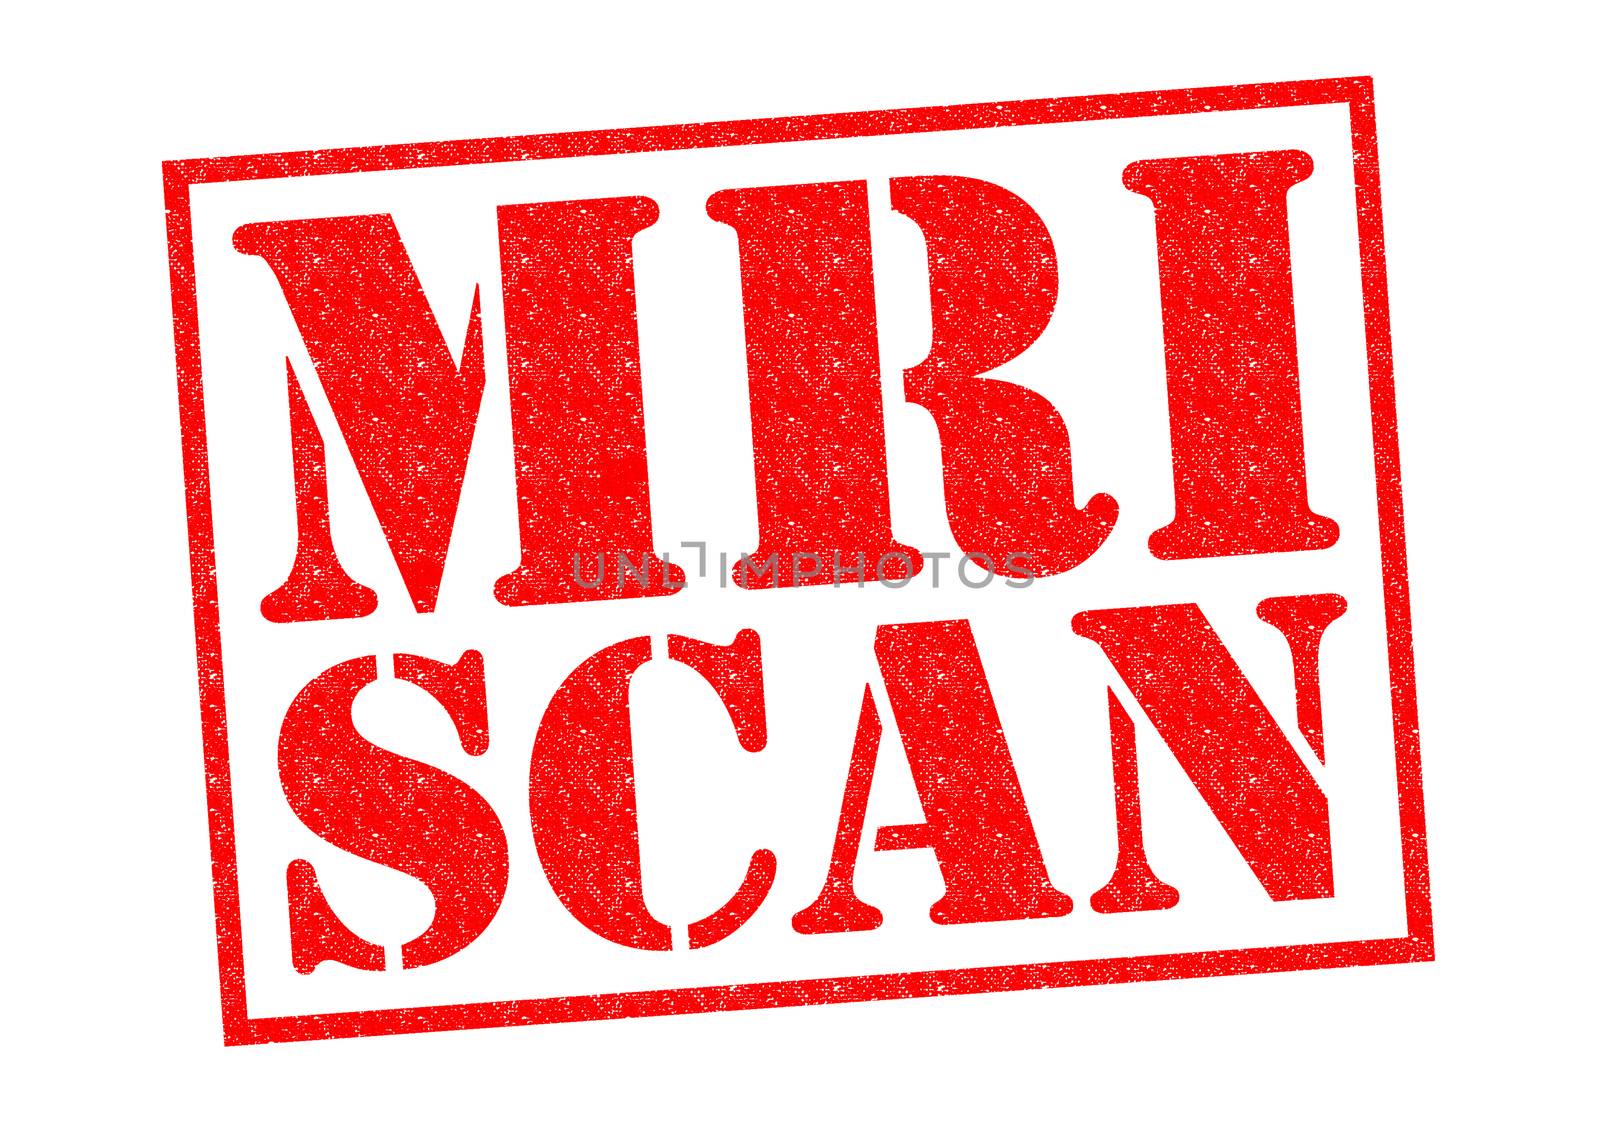 MRI SCAN red Rubber Stamp over a whoite background.